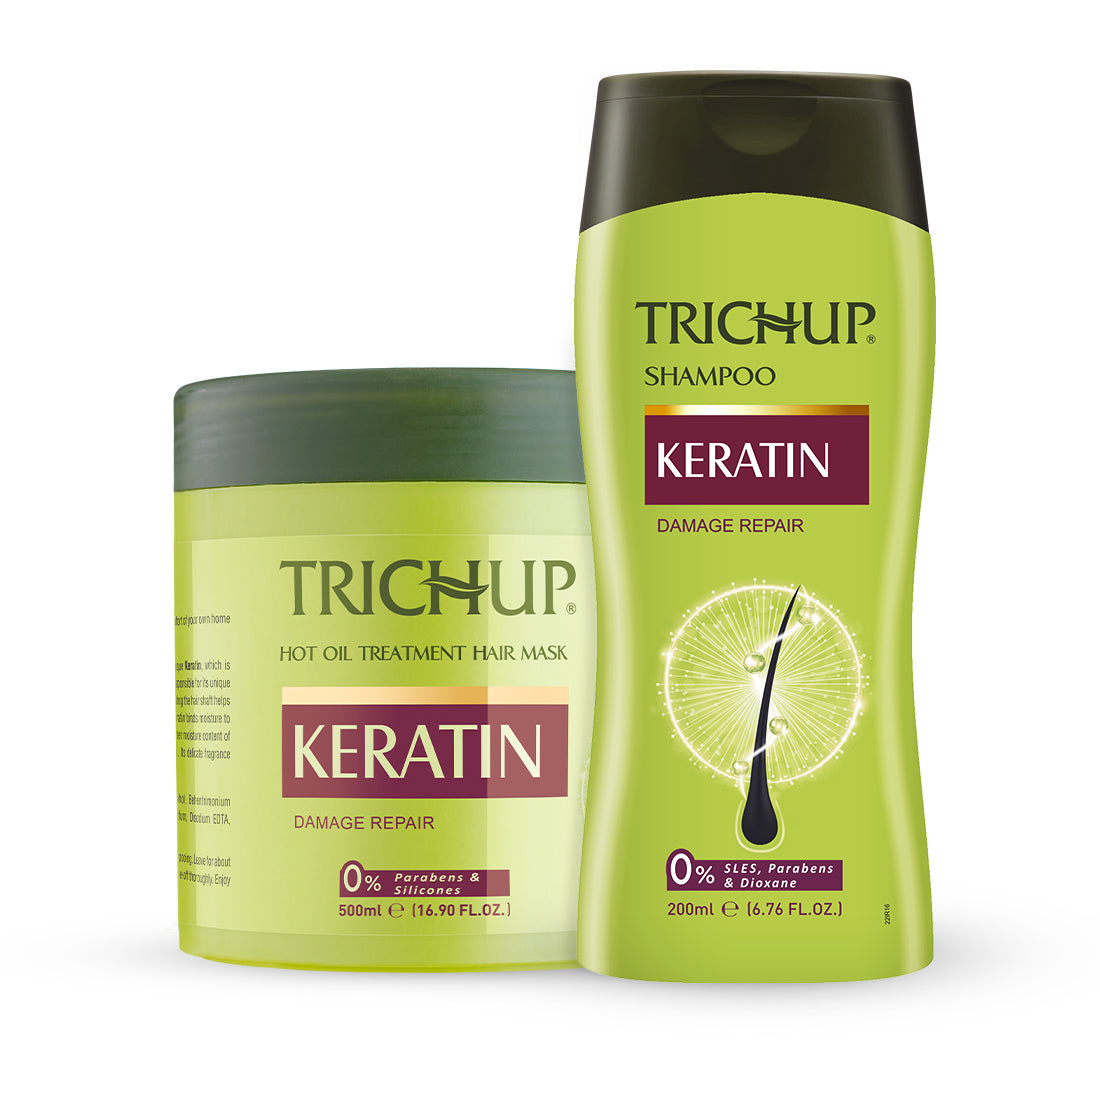 Trichup Keratin Shampoo & Hair Mask - Damaged Hair Repair With Keratin - Retains Moisture, Gets Rid of Split Ends - Improves Shine & Manageability of Your Hair - VasuStore